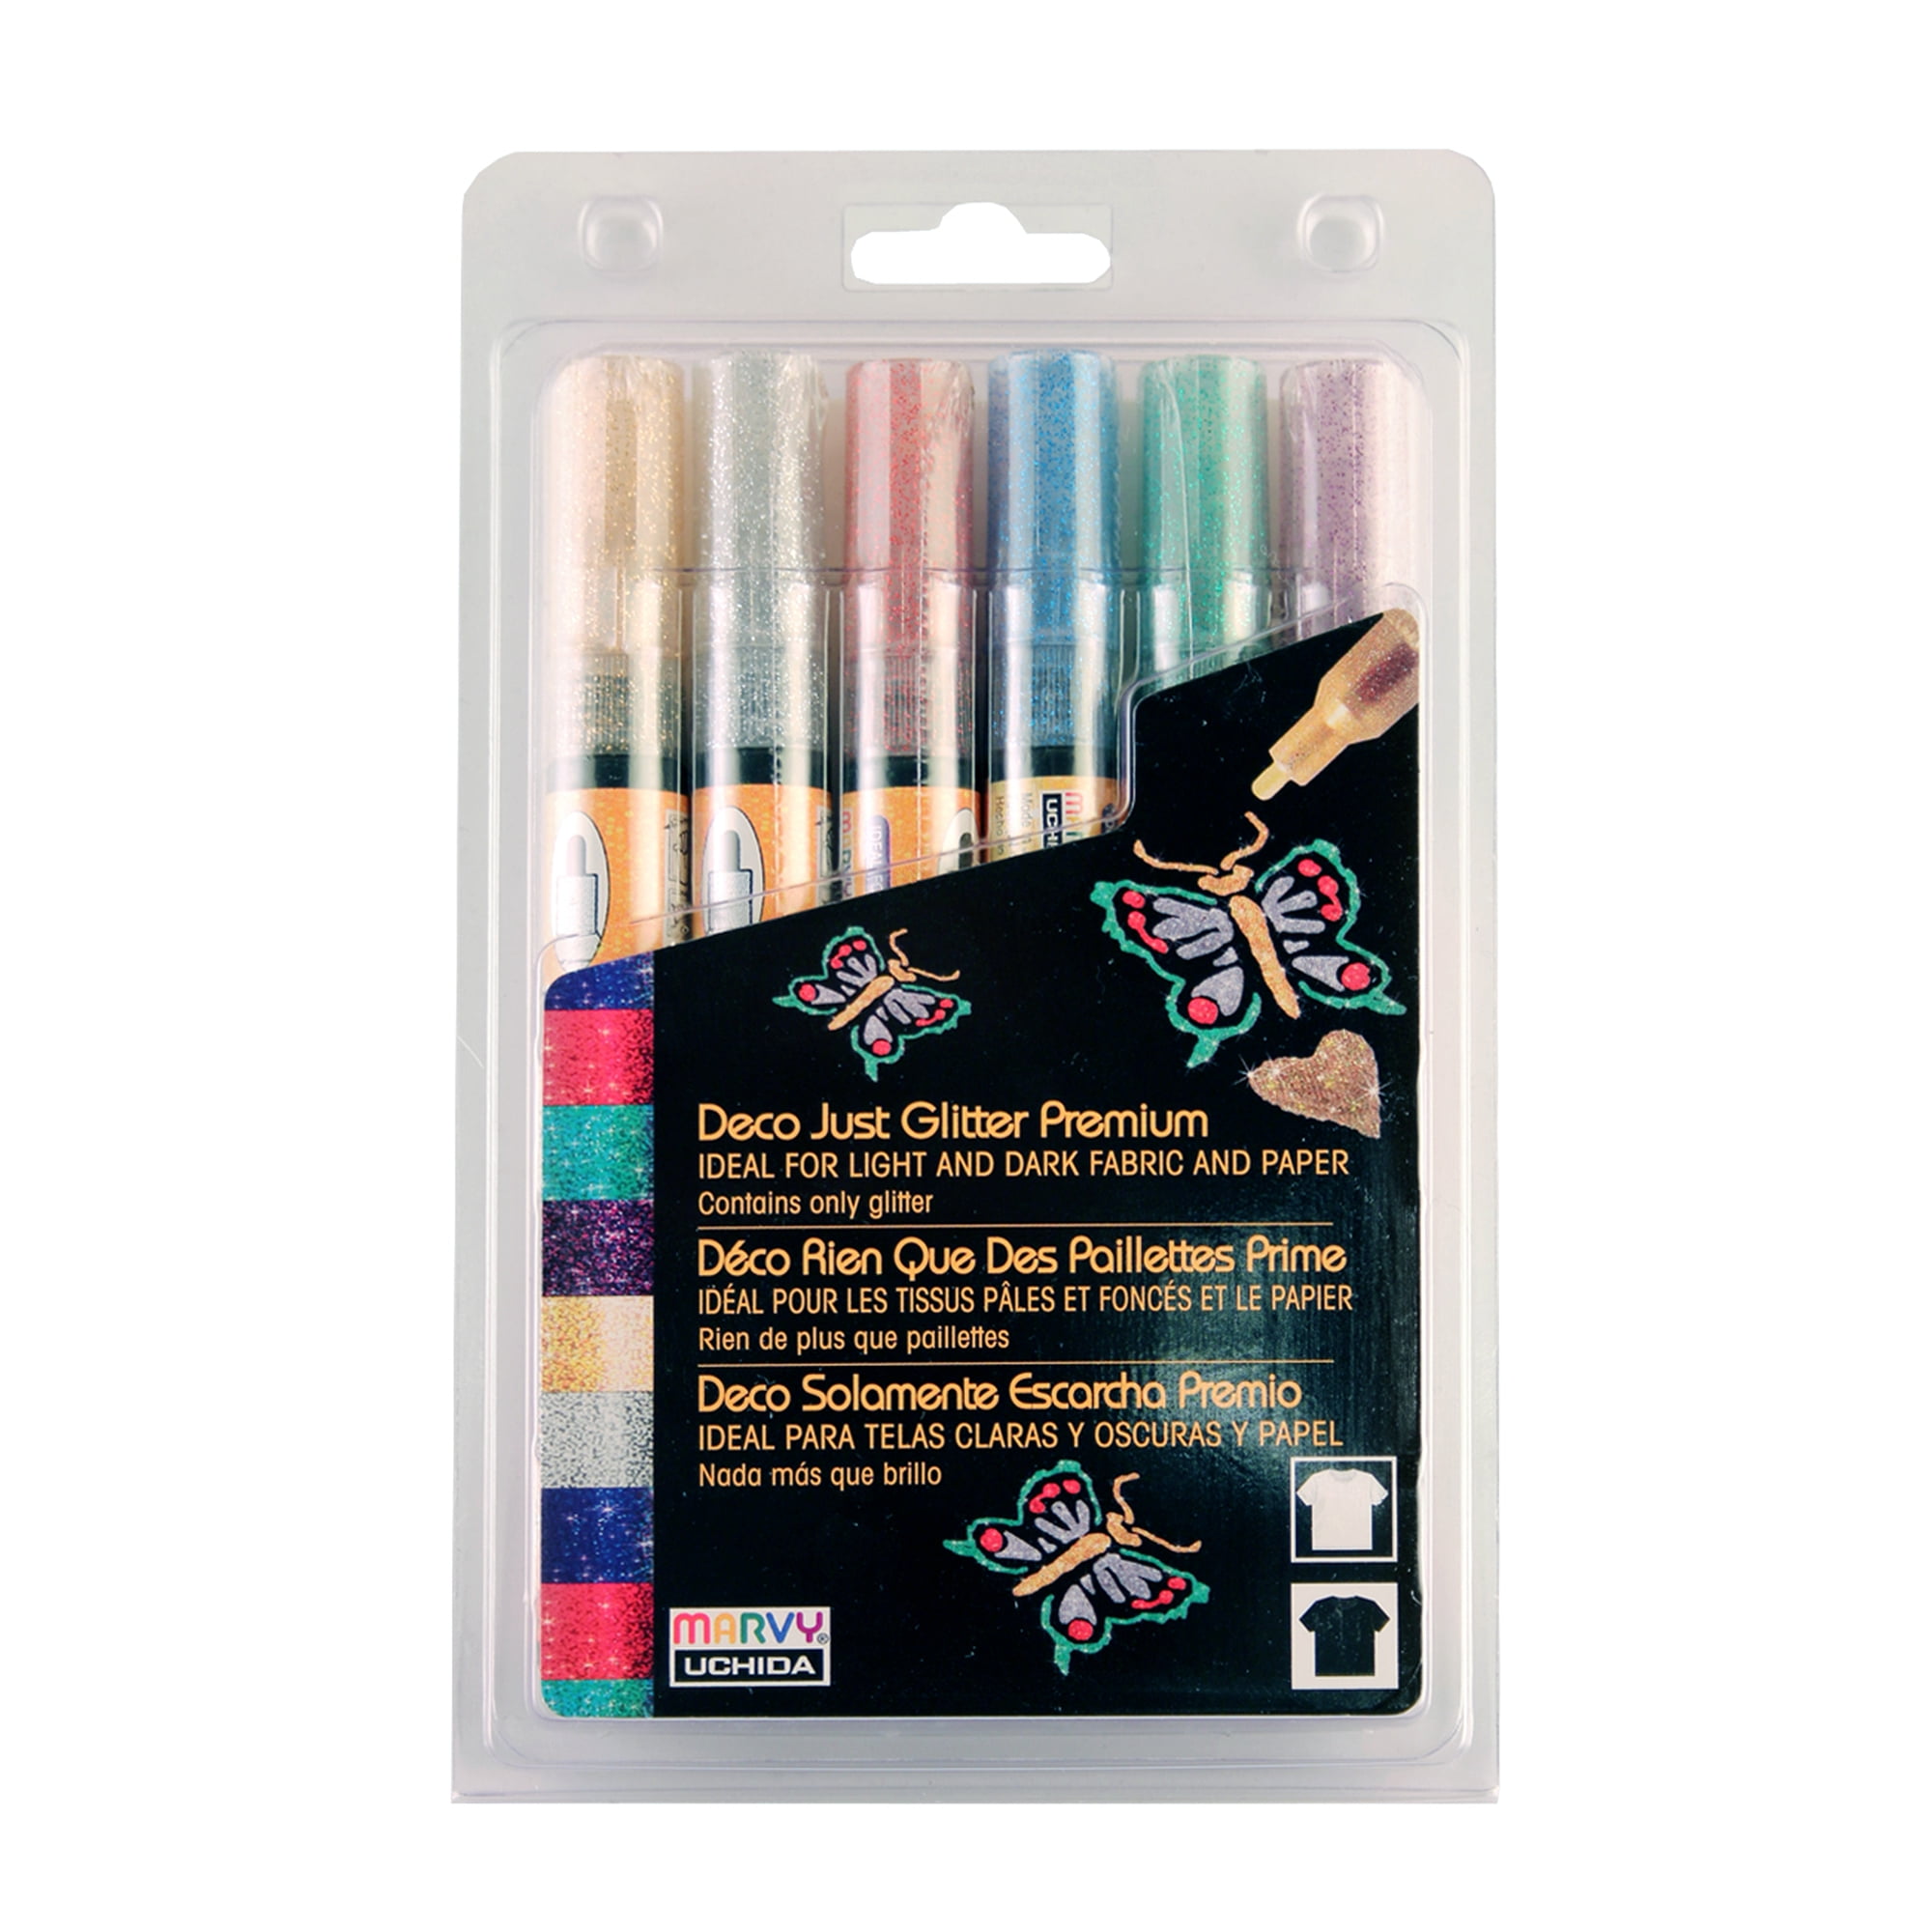 Willstar 12 Fabric Markers Pens Set - Non Toxic Indelible and Permanent Fabric  Paint Fine Point Textile Marker Pen - Pens Fine Point Tip 